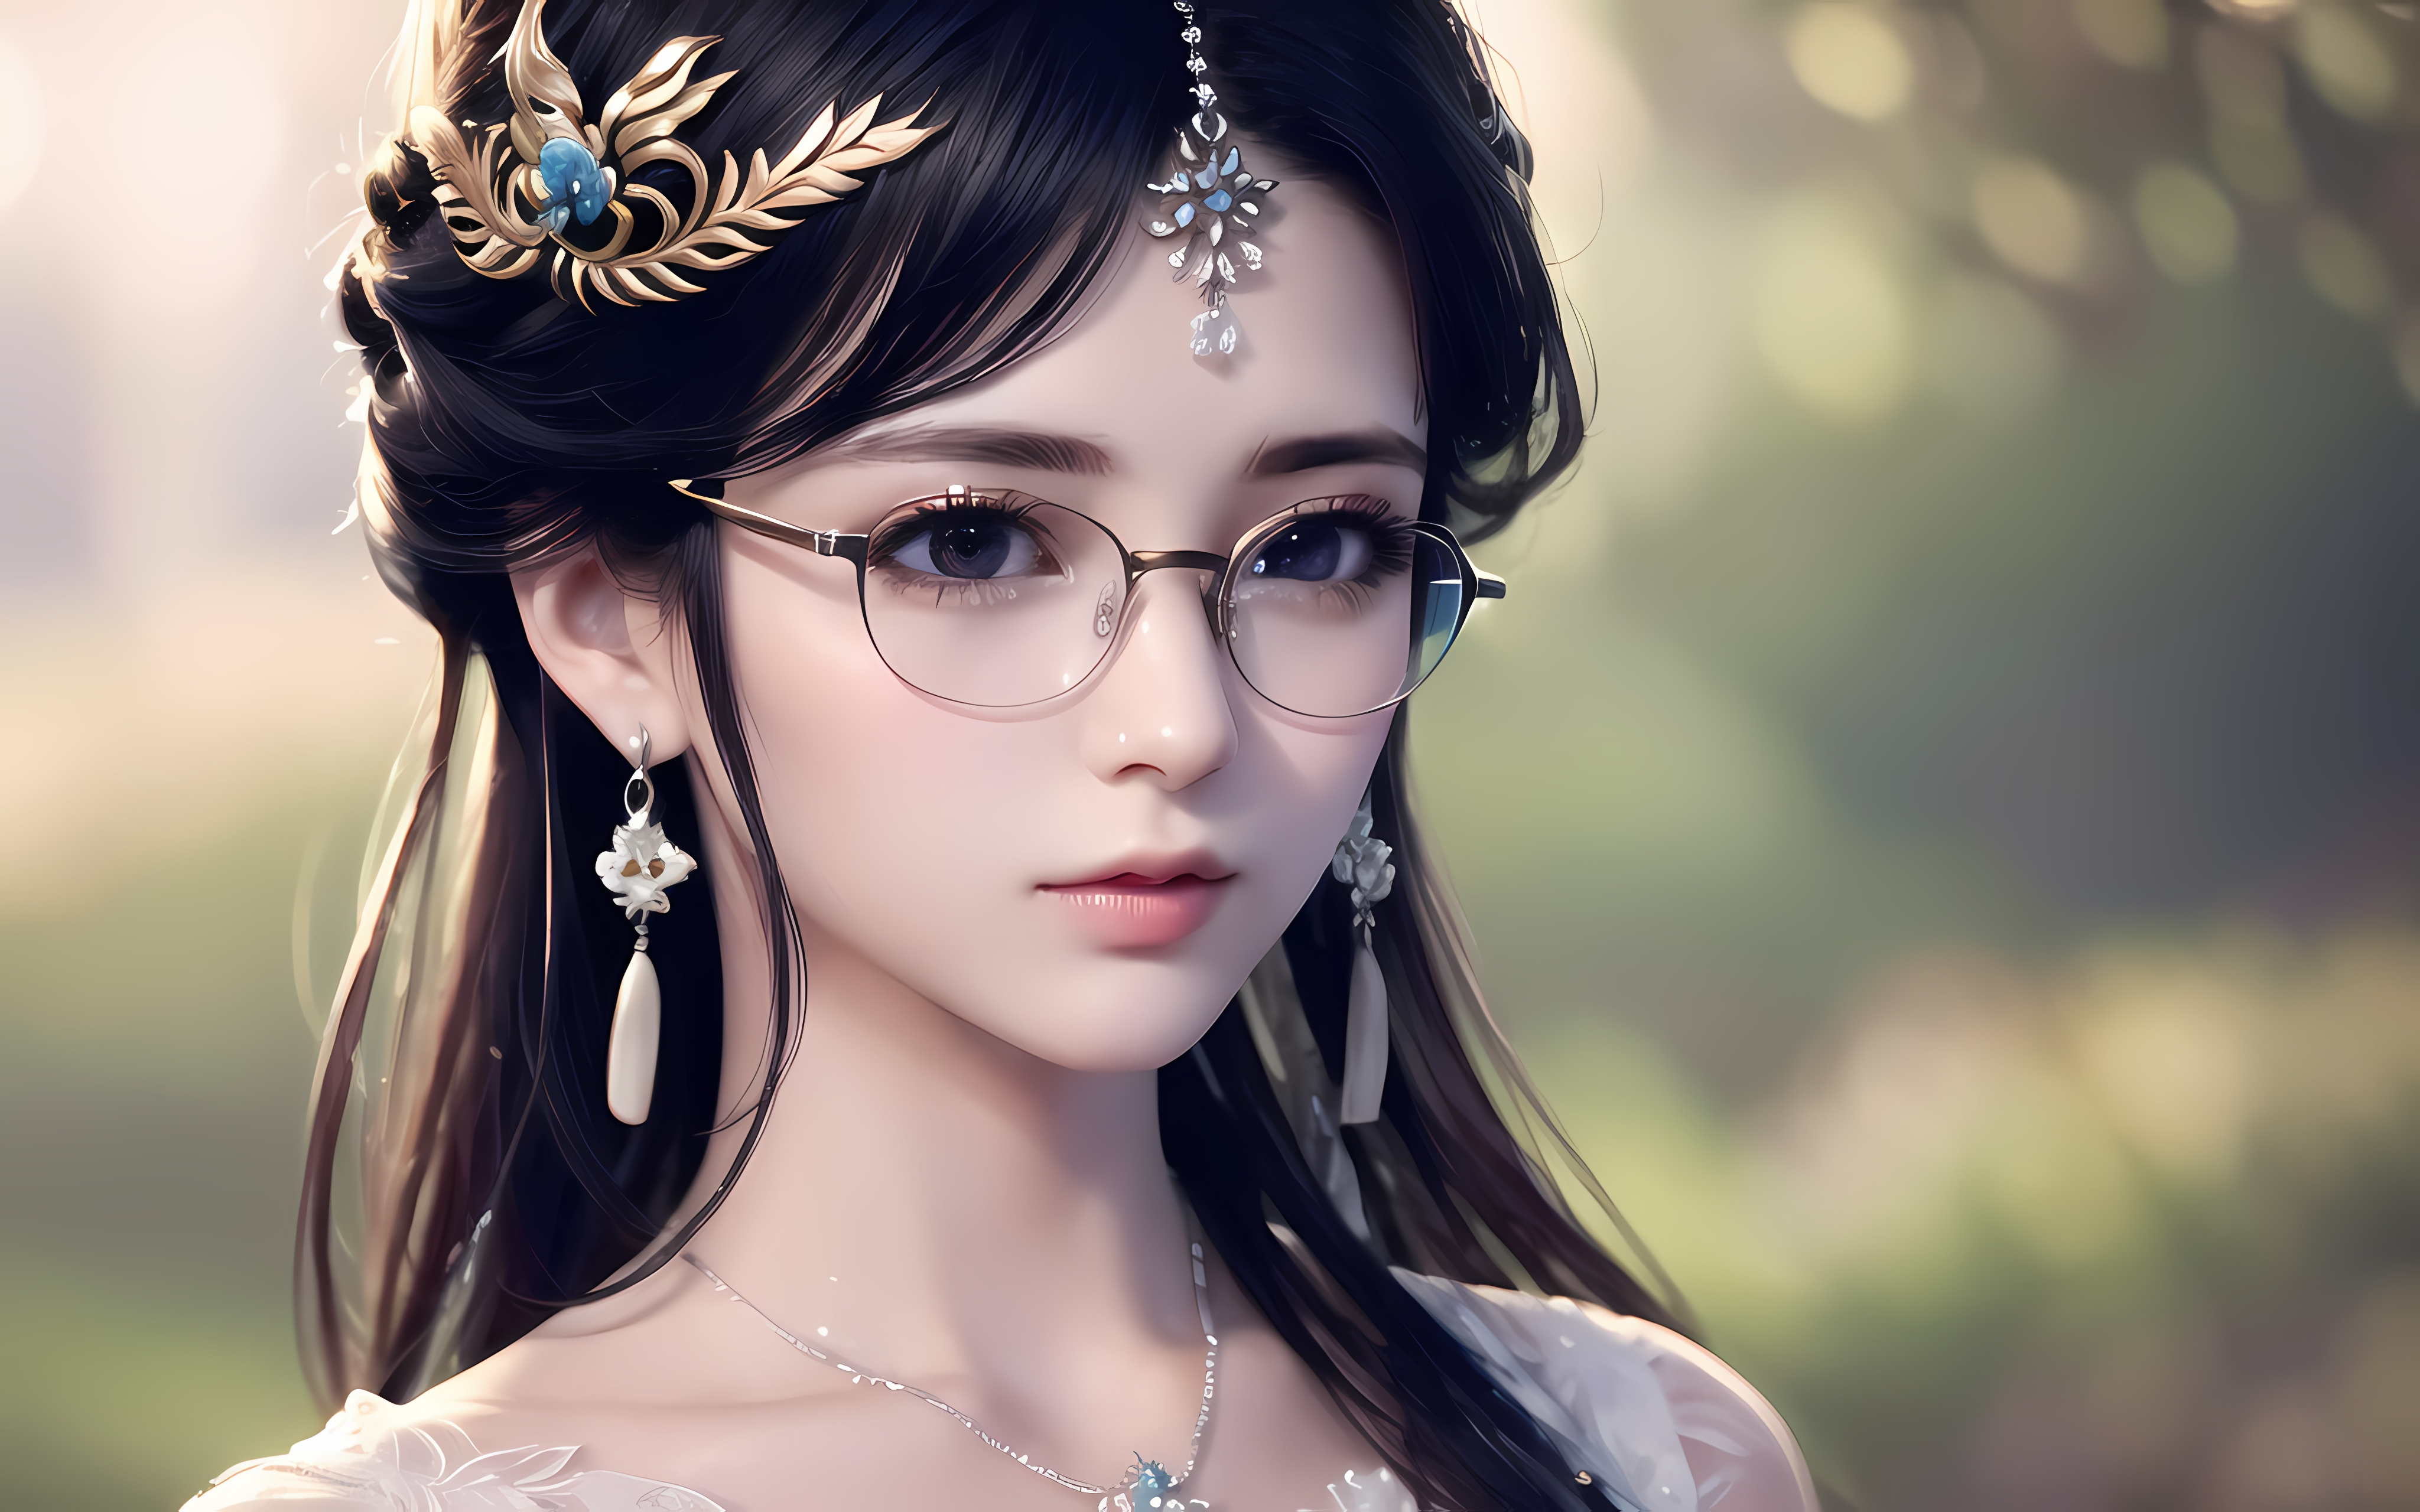 Free photo A drawn girl with glasses and an Asian appearance